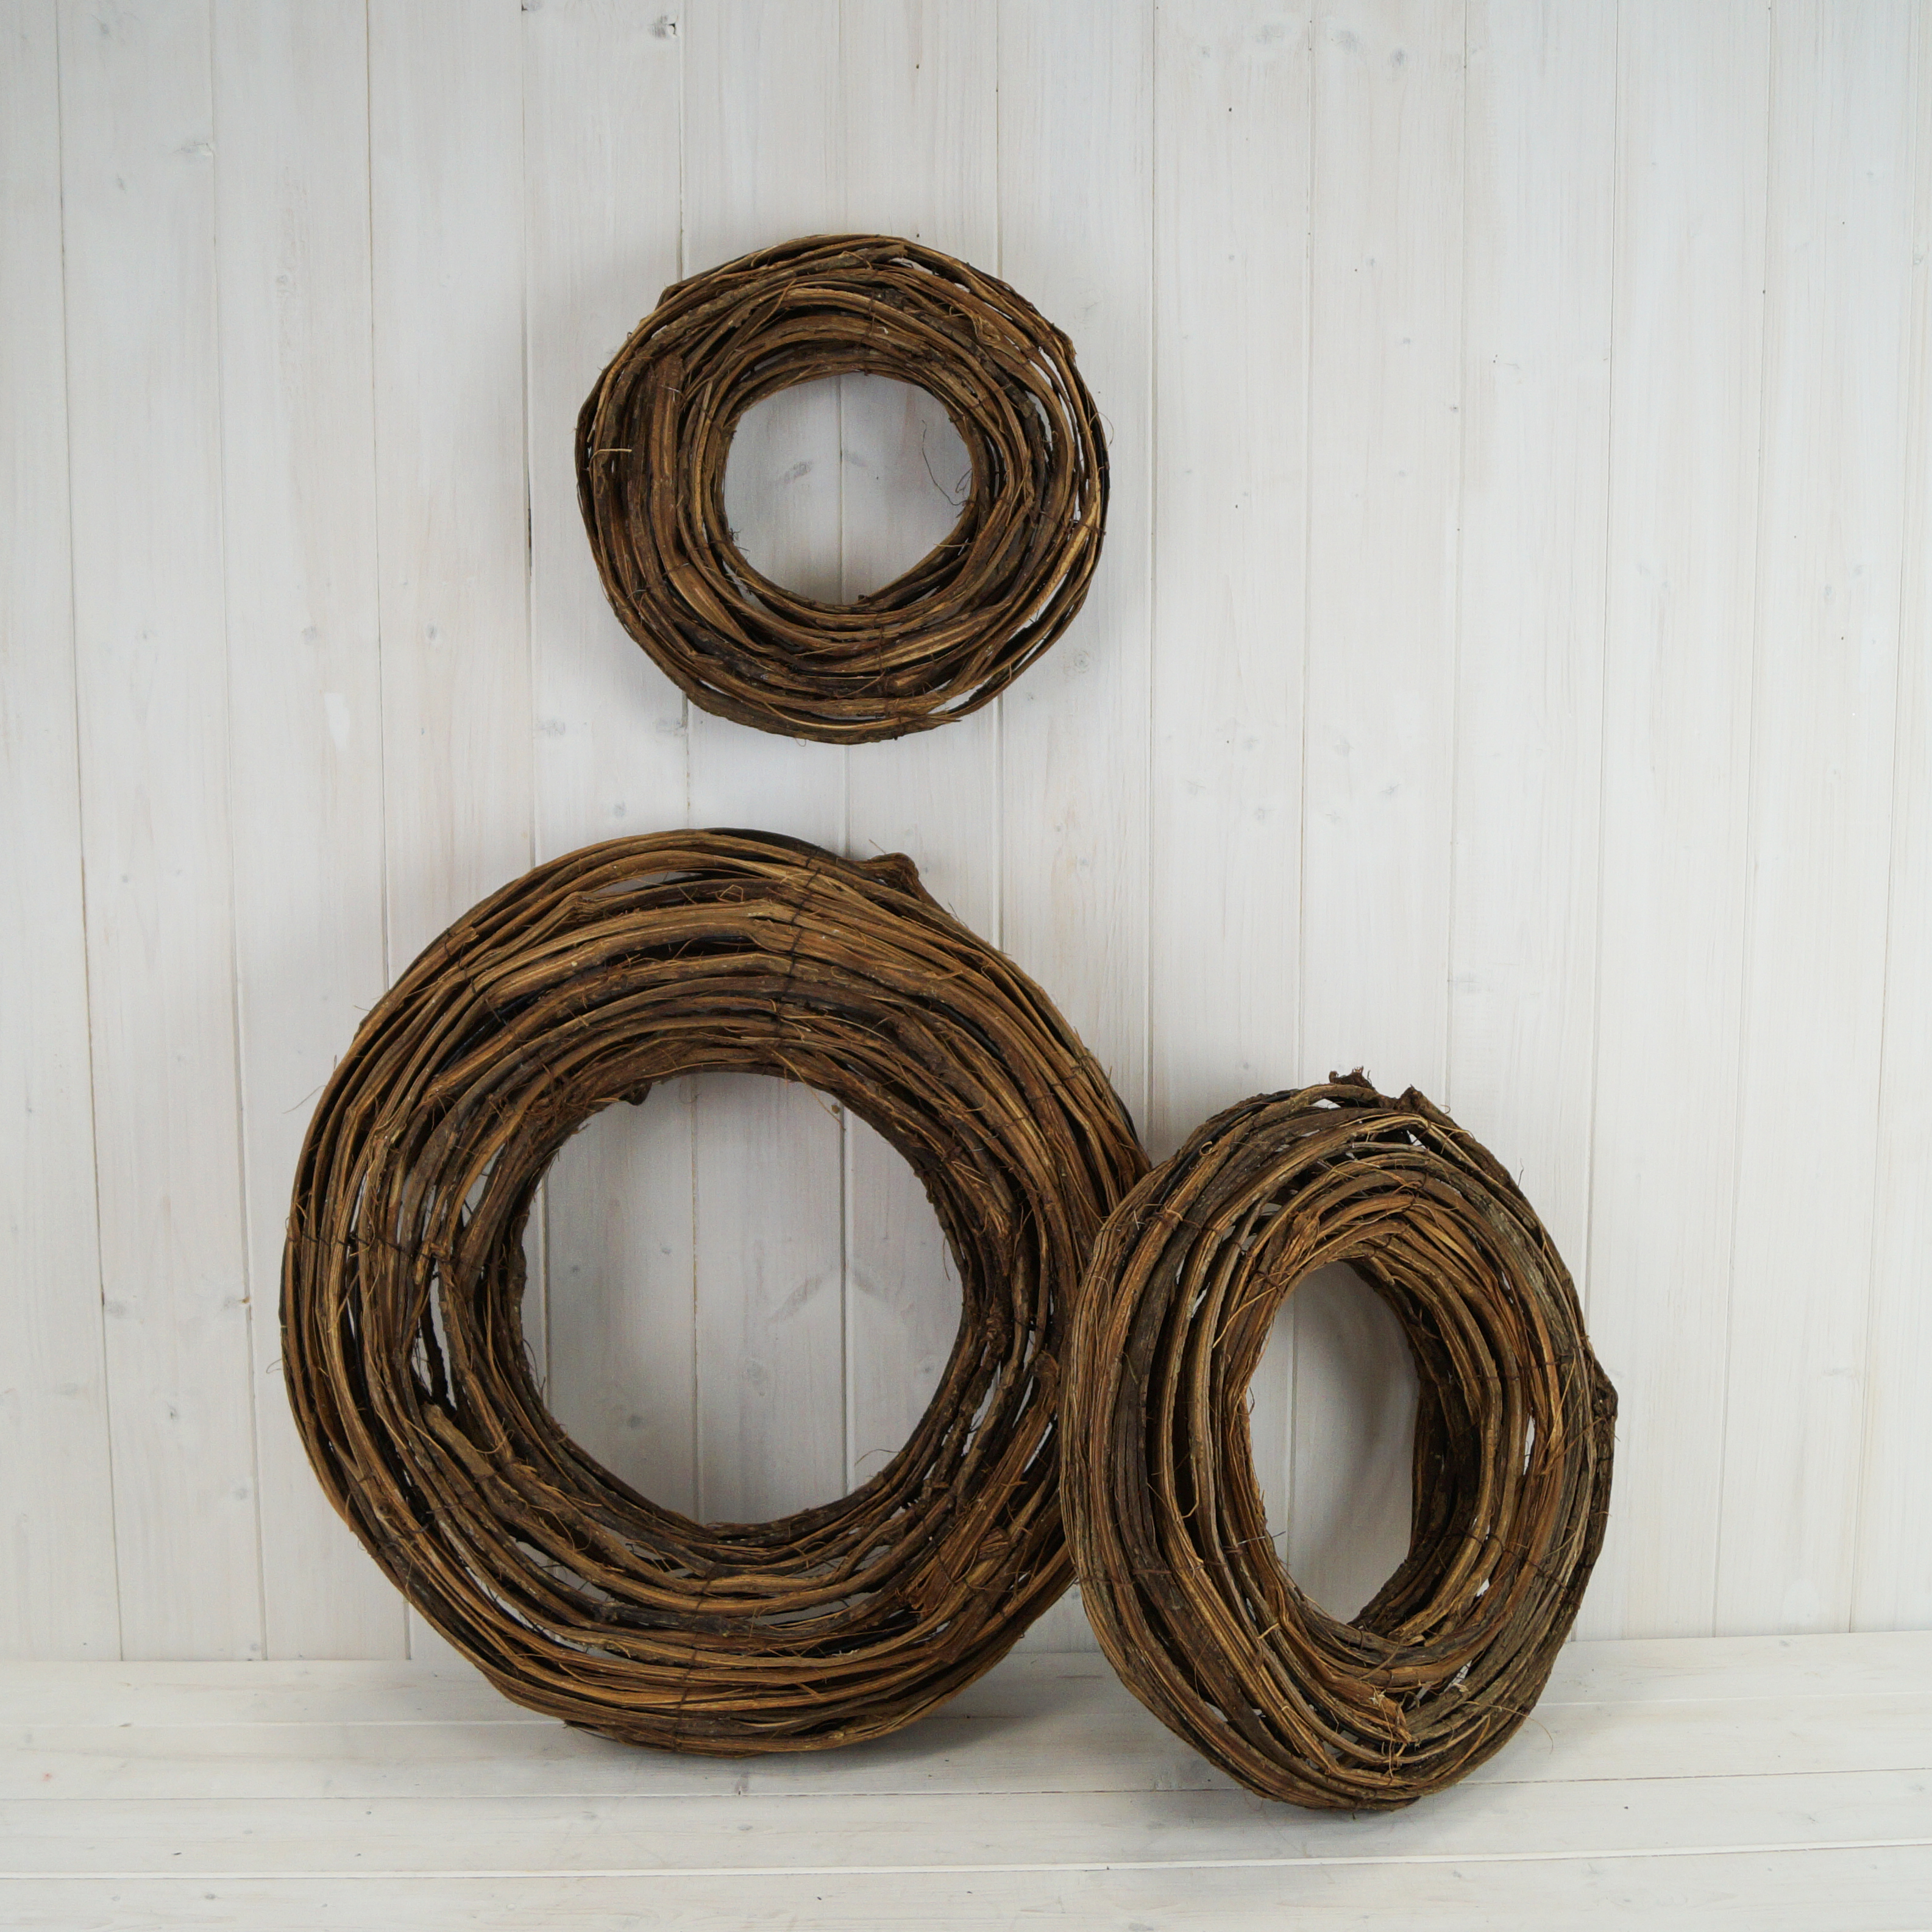 Large Rustic Natural Rattan Wreath detail page